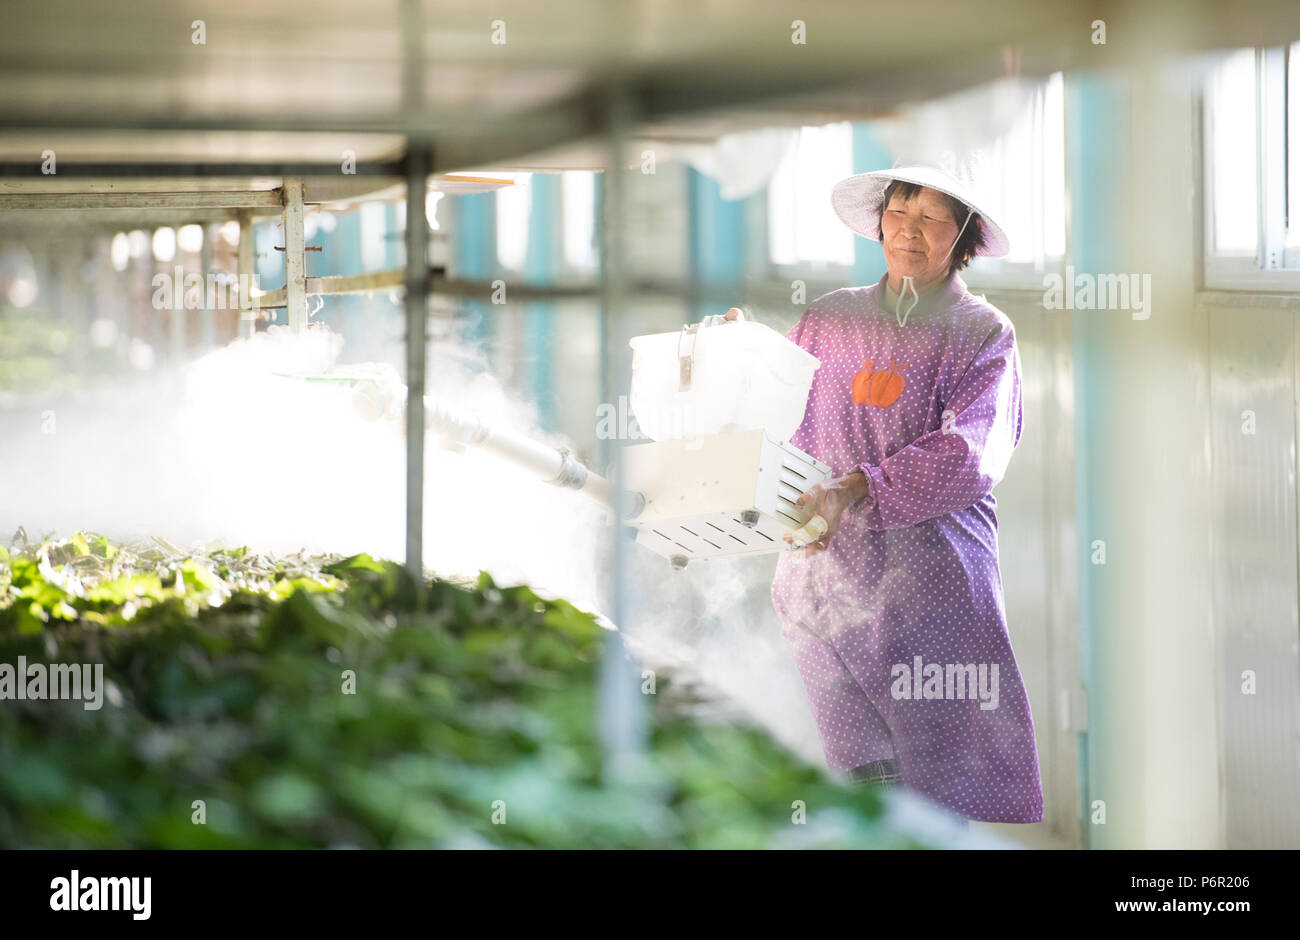 Chun'an, China's Zhejiang Province. 9th May, 2018. A worker sprays disinfectant at a silkworm breeding base of Cathaya Group in Xiajiang Village of Chun'an County, east China's Zhejiang Province, May 9, 2018. Chun'an County cooperated with Cathaya Group in building silkworm breeding bases to produce high quality cocoon and silk products. To date, about 4,000 hectares mulberry bushes have been cultivated and some 300 tonnes raw silk are produced per year. Credit: Weng Xinyang/Xinhua/Alamy Live News Stock Photo